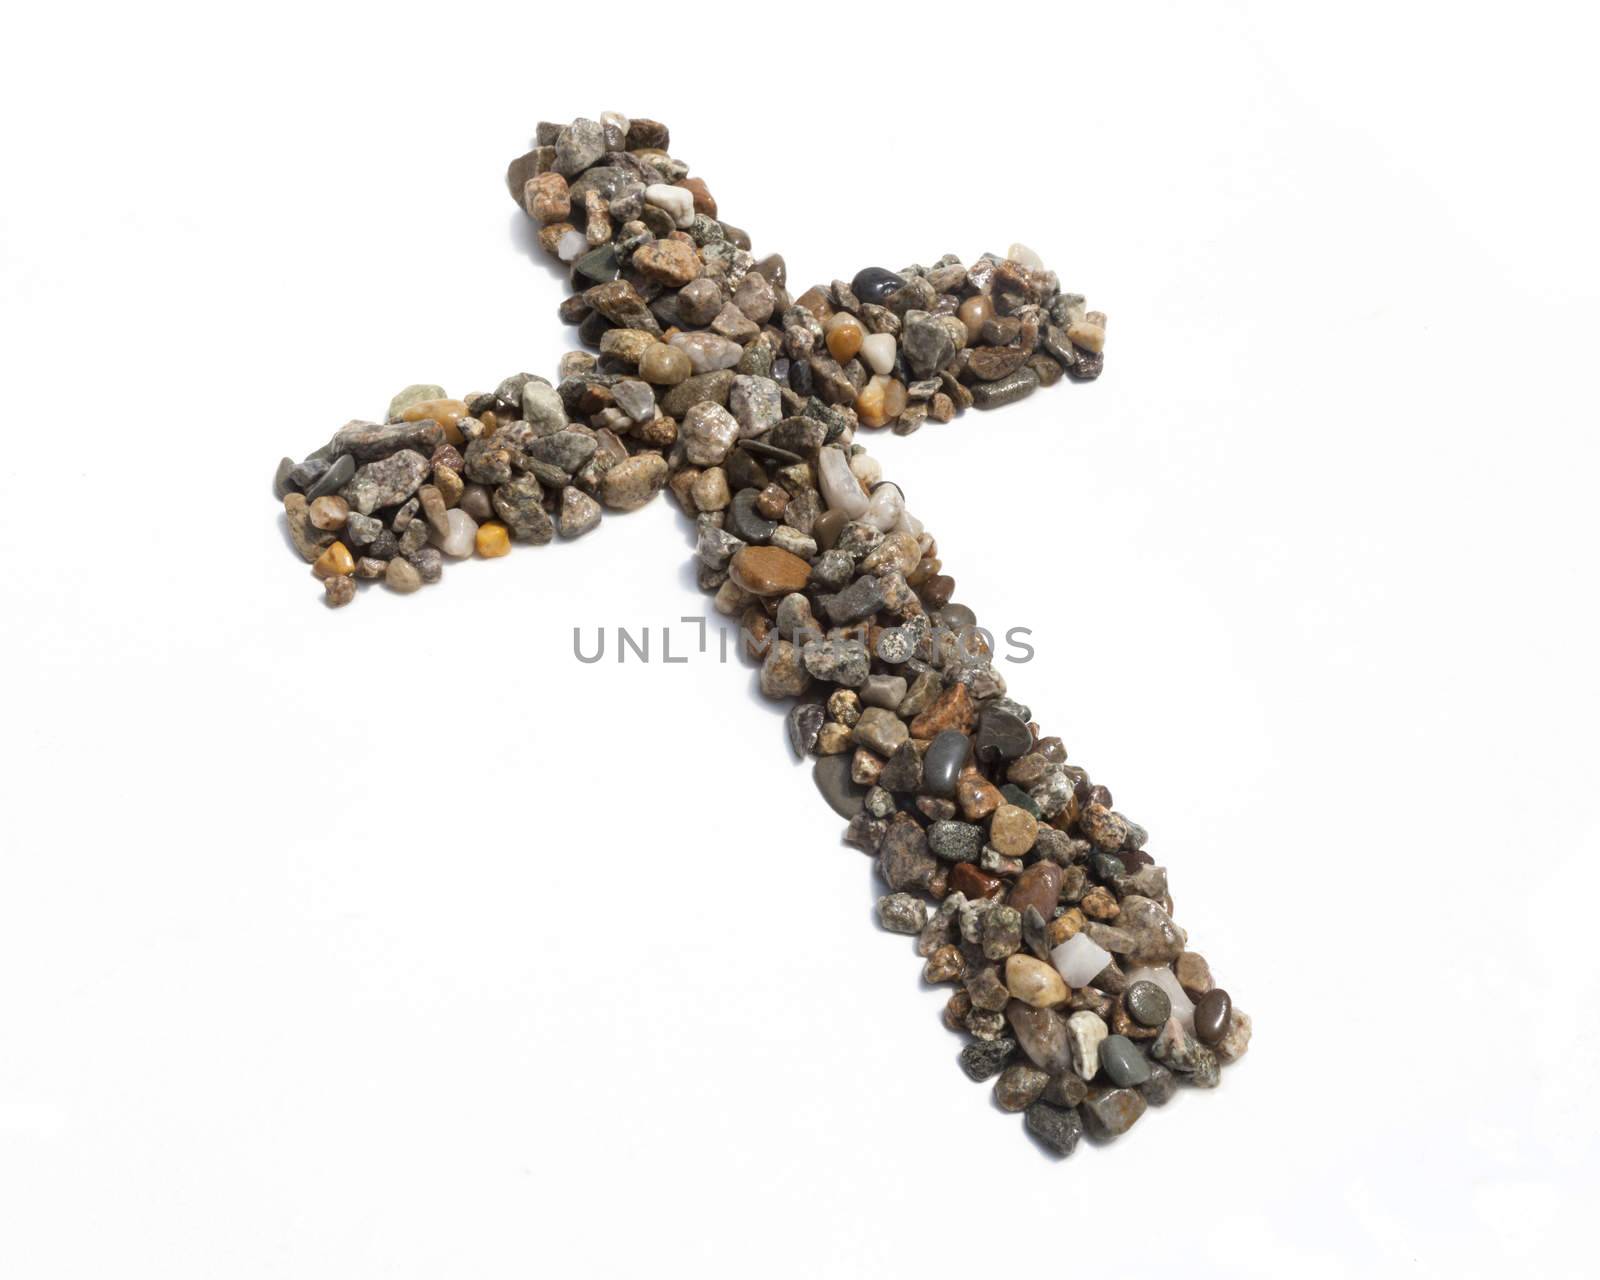 A cross made of pebbles against a white background.